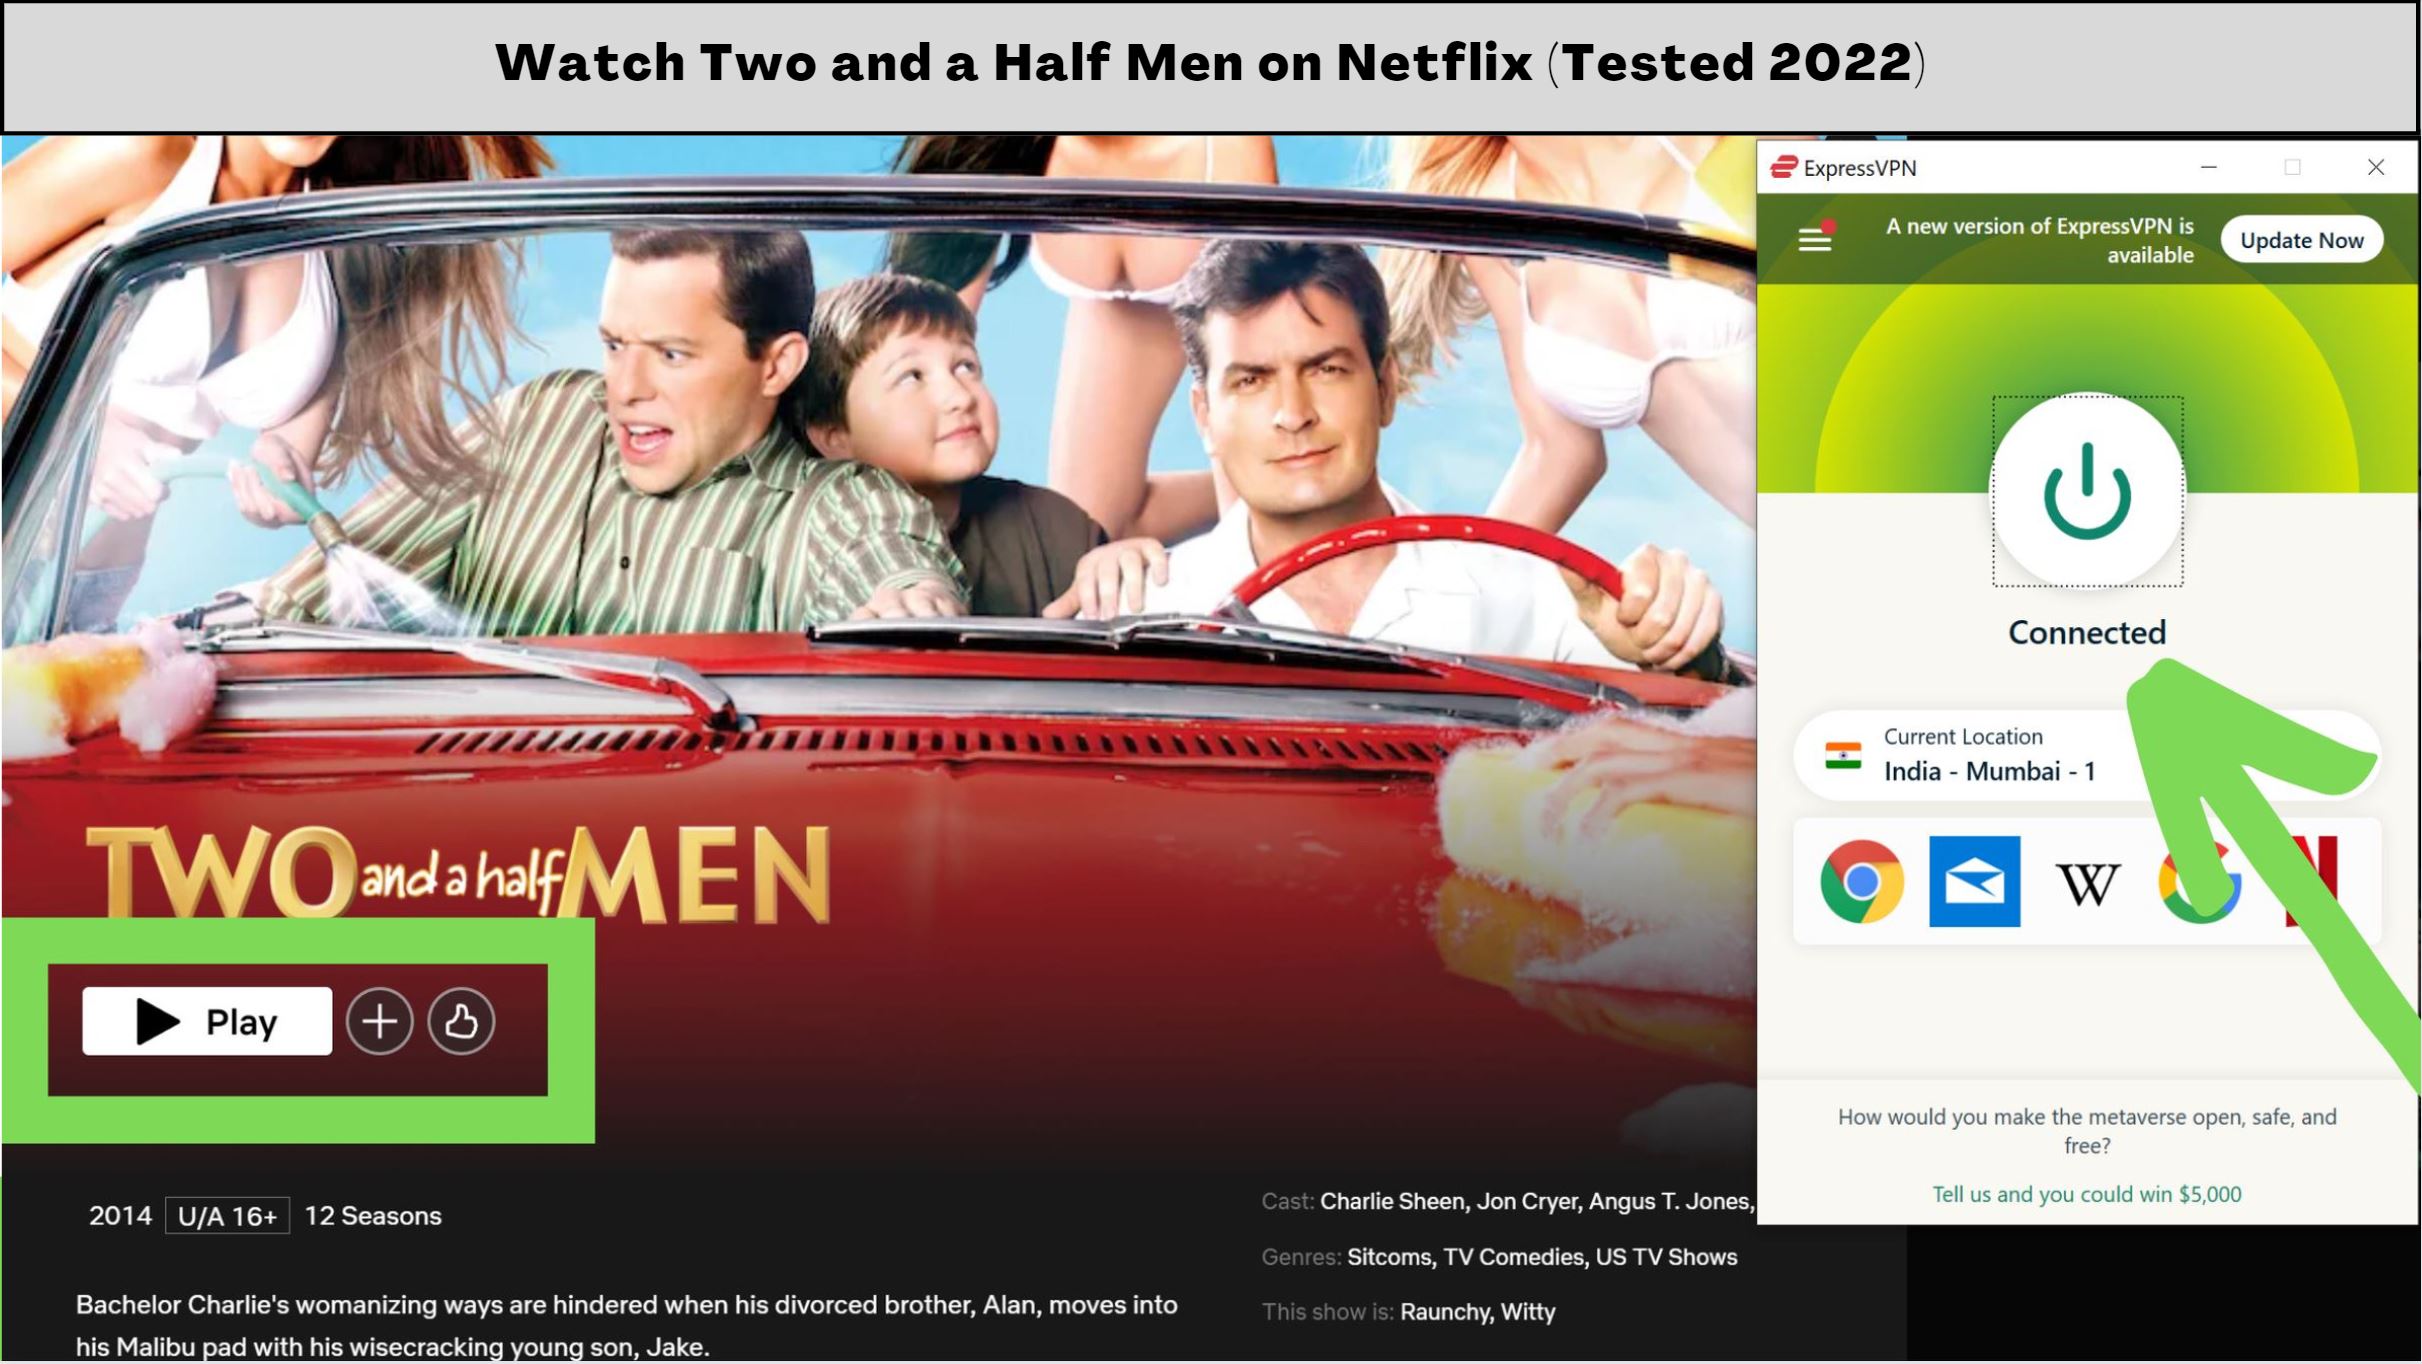 Two and a Half Men on Netflix